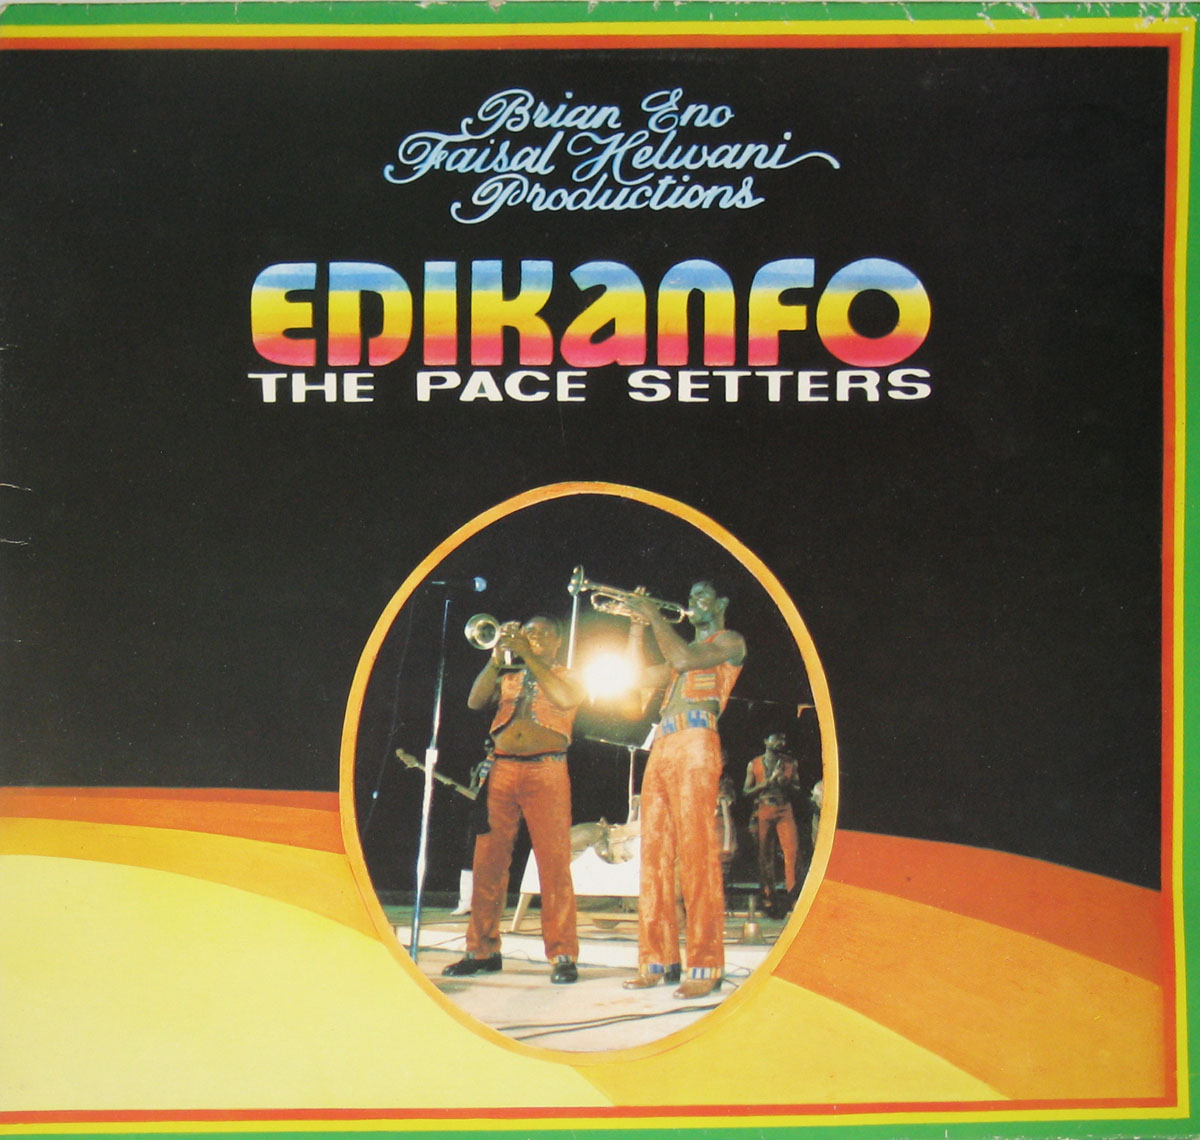 High Resolution Photo EDIKANFO AFRICAN SUPER BAND THE PACE SETTERS BRIAN ENO 